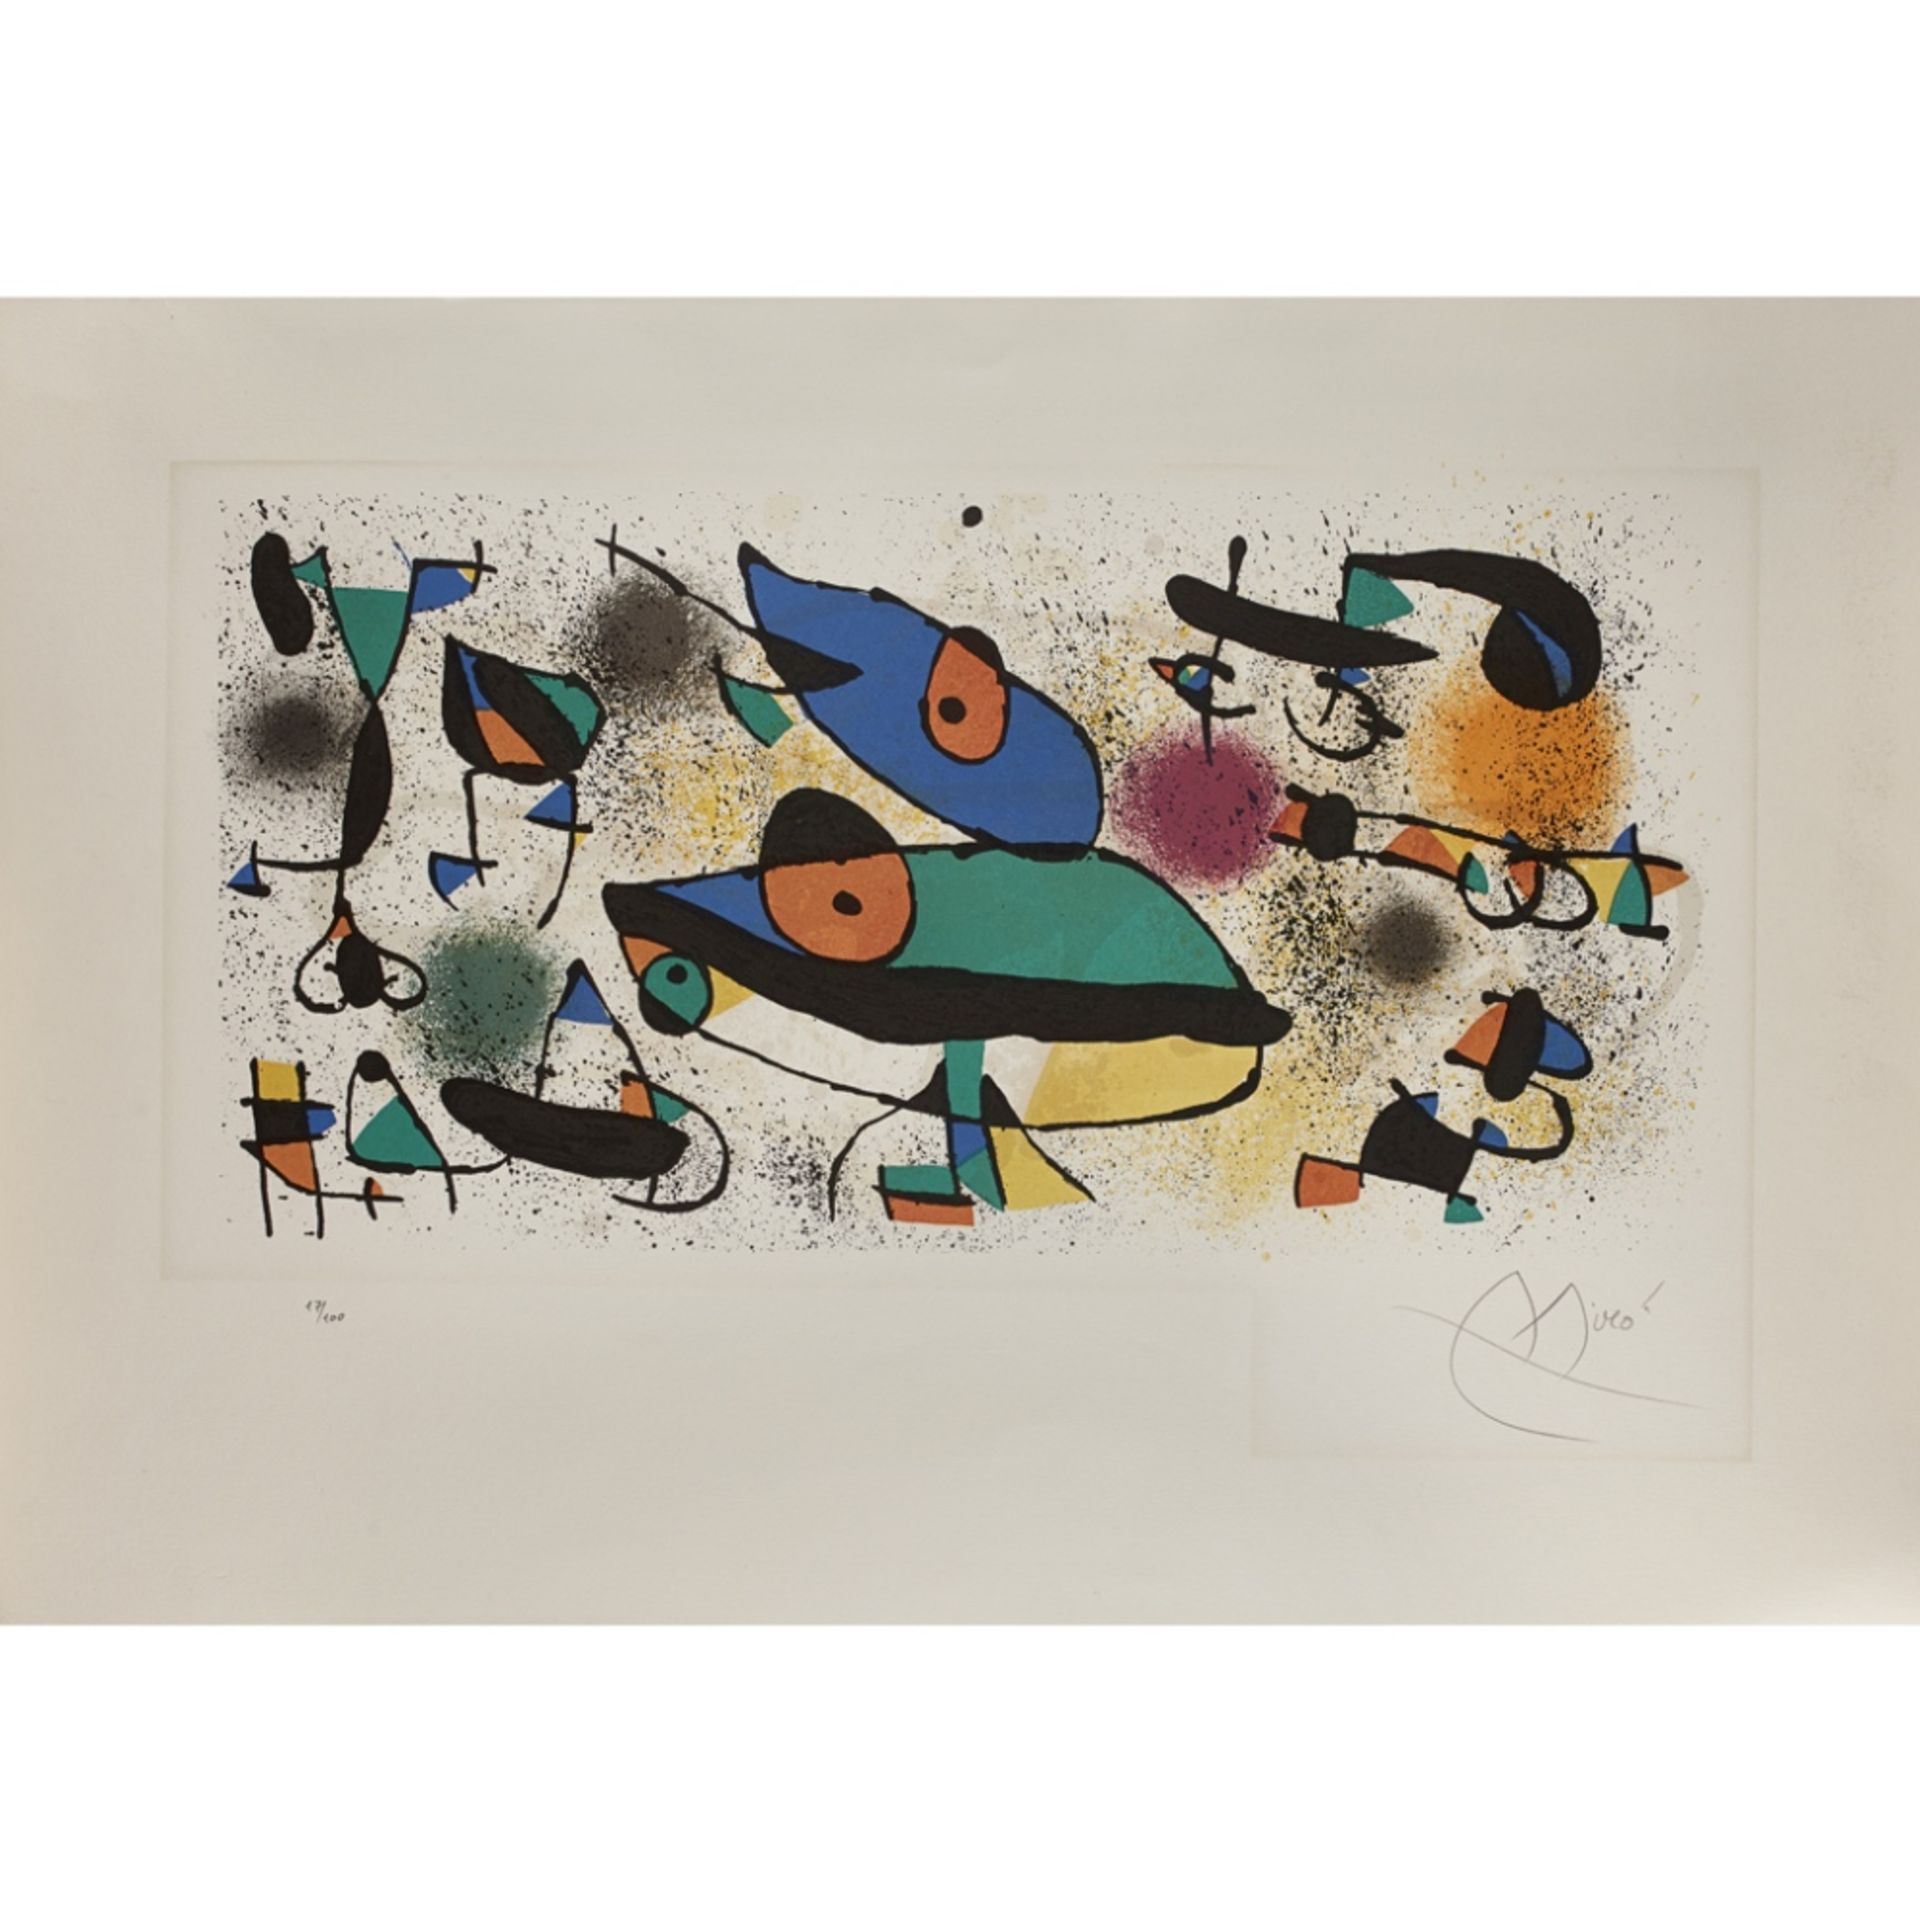 [§] JOAN MIRÓ (SPANISH 1893-1983)SCULPTURES II - 1974 Signed and numbered 17/100 in pencil,